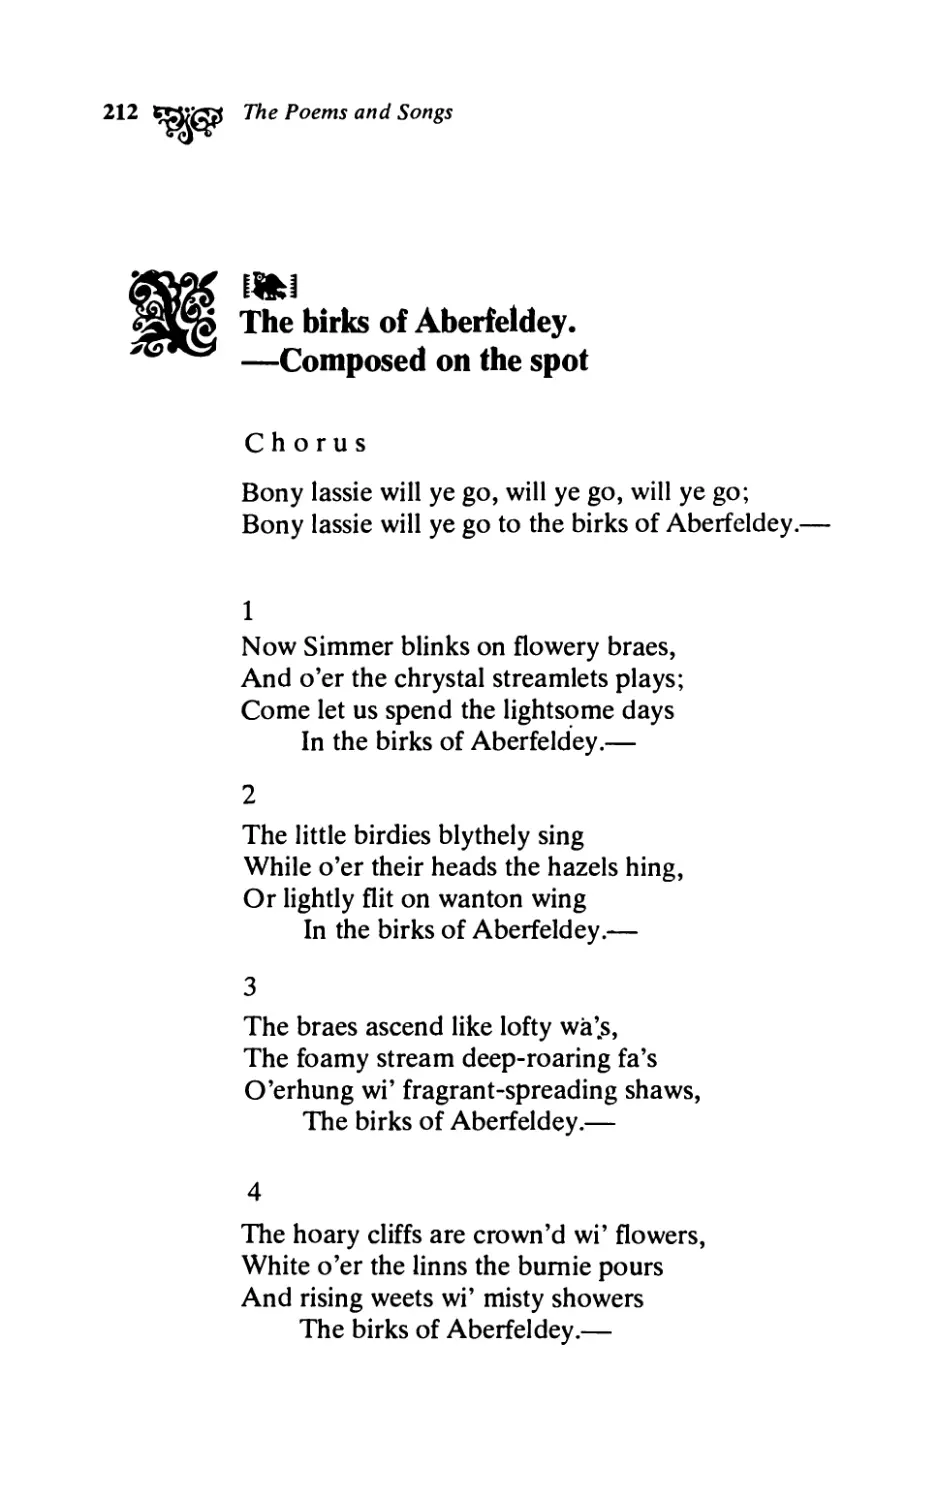 The Birks of Aberfeldy. - Composed on the spot